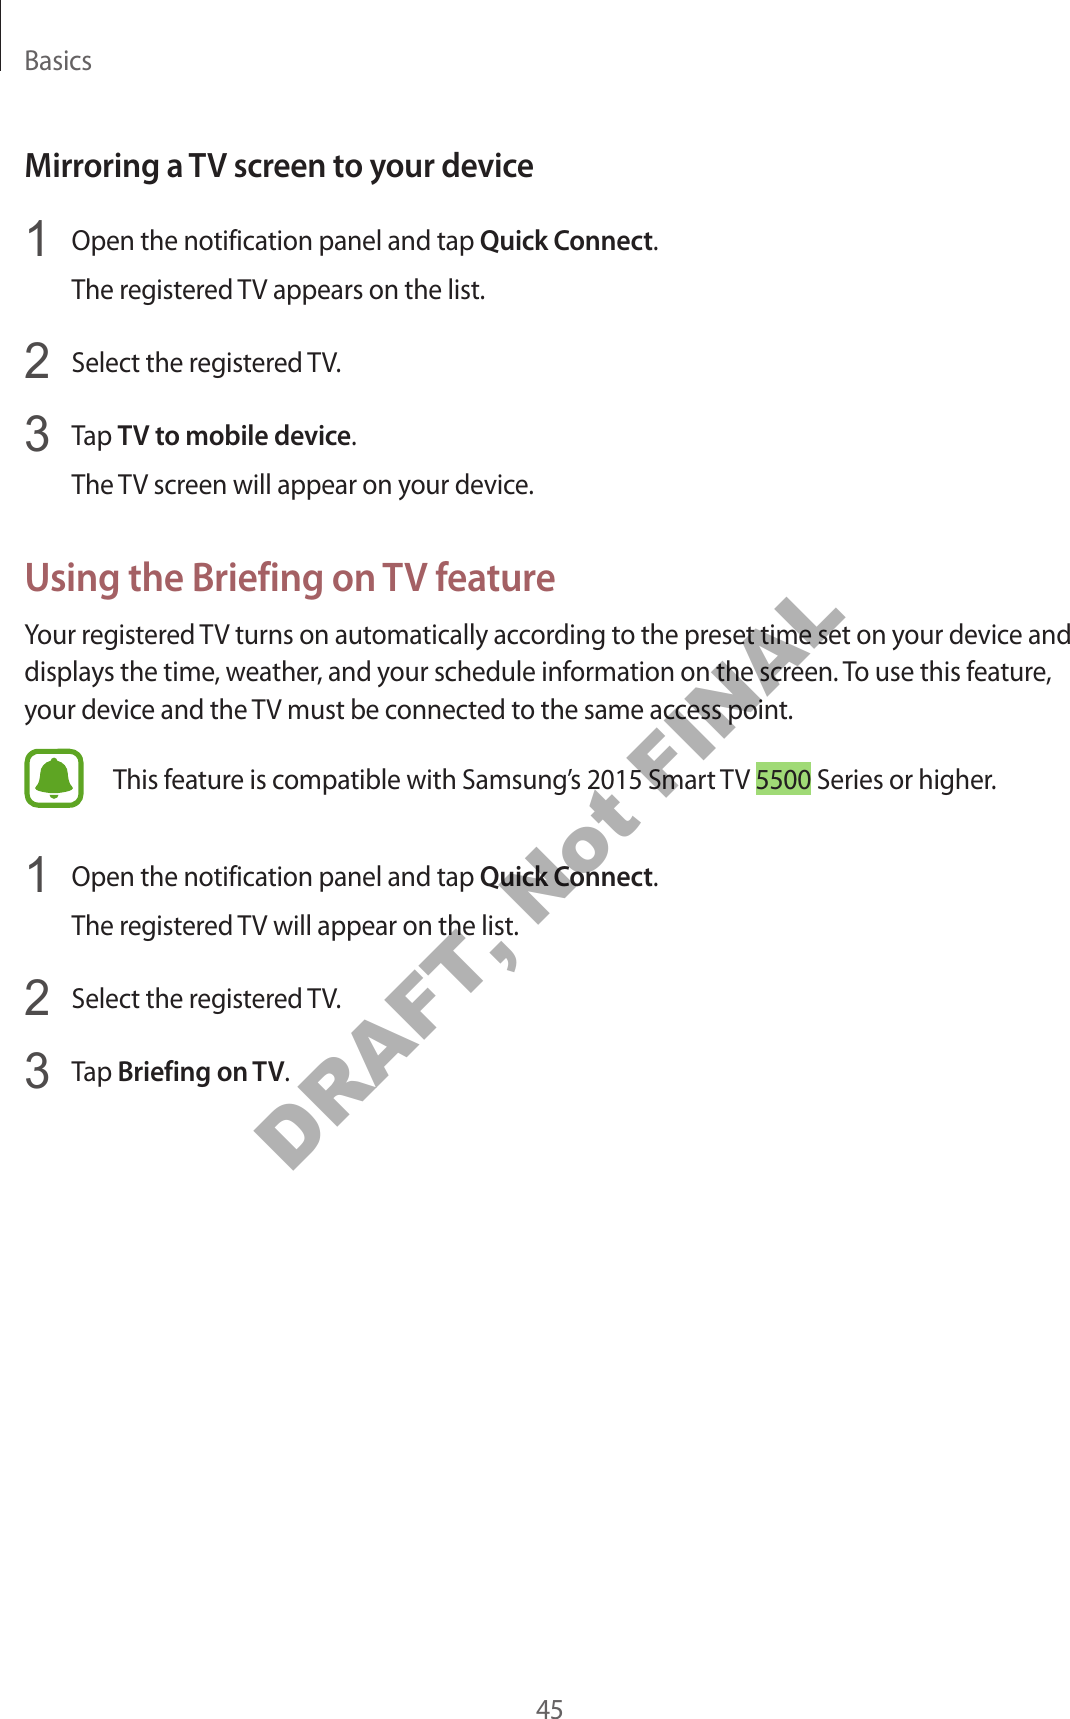 Basics45Mirroring a TV screen to your device1  Open the notification panel and tap Quick Connect.The registered TV appears on the list.2  Select the registered TV.3  Tap TV to mobile device.The TV screen will appear on your device.Using the Briefing on TV featureYour registered TV turns on automatically according to the preset time set on your device and displays the time, weather, and your schedule information on the screen. To use this feature, your device and the TV must be connected to the same access point.This feature is compatible with Samsung’s 2015 Smart TV 5500 Series or higher.1  Open the notification panel and tap Quick Connect.The registered TV will appear on the list.2  Select the registered TV.3  Tap Briefing on TV.DRAFT, Not FINAL